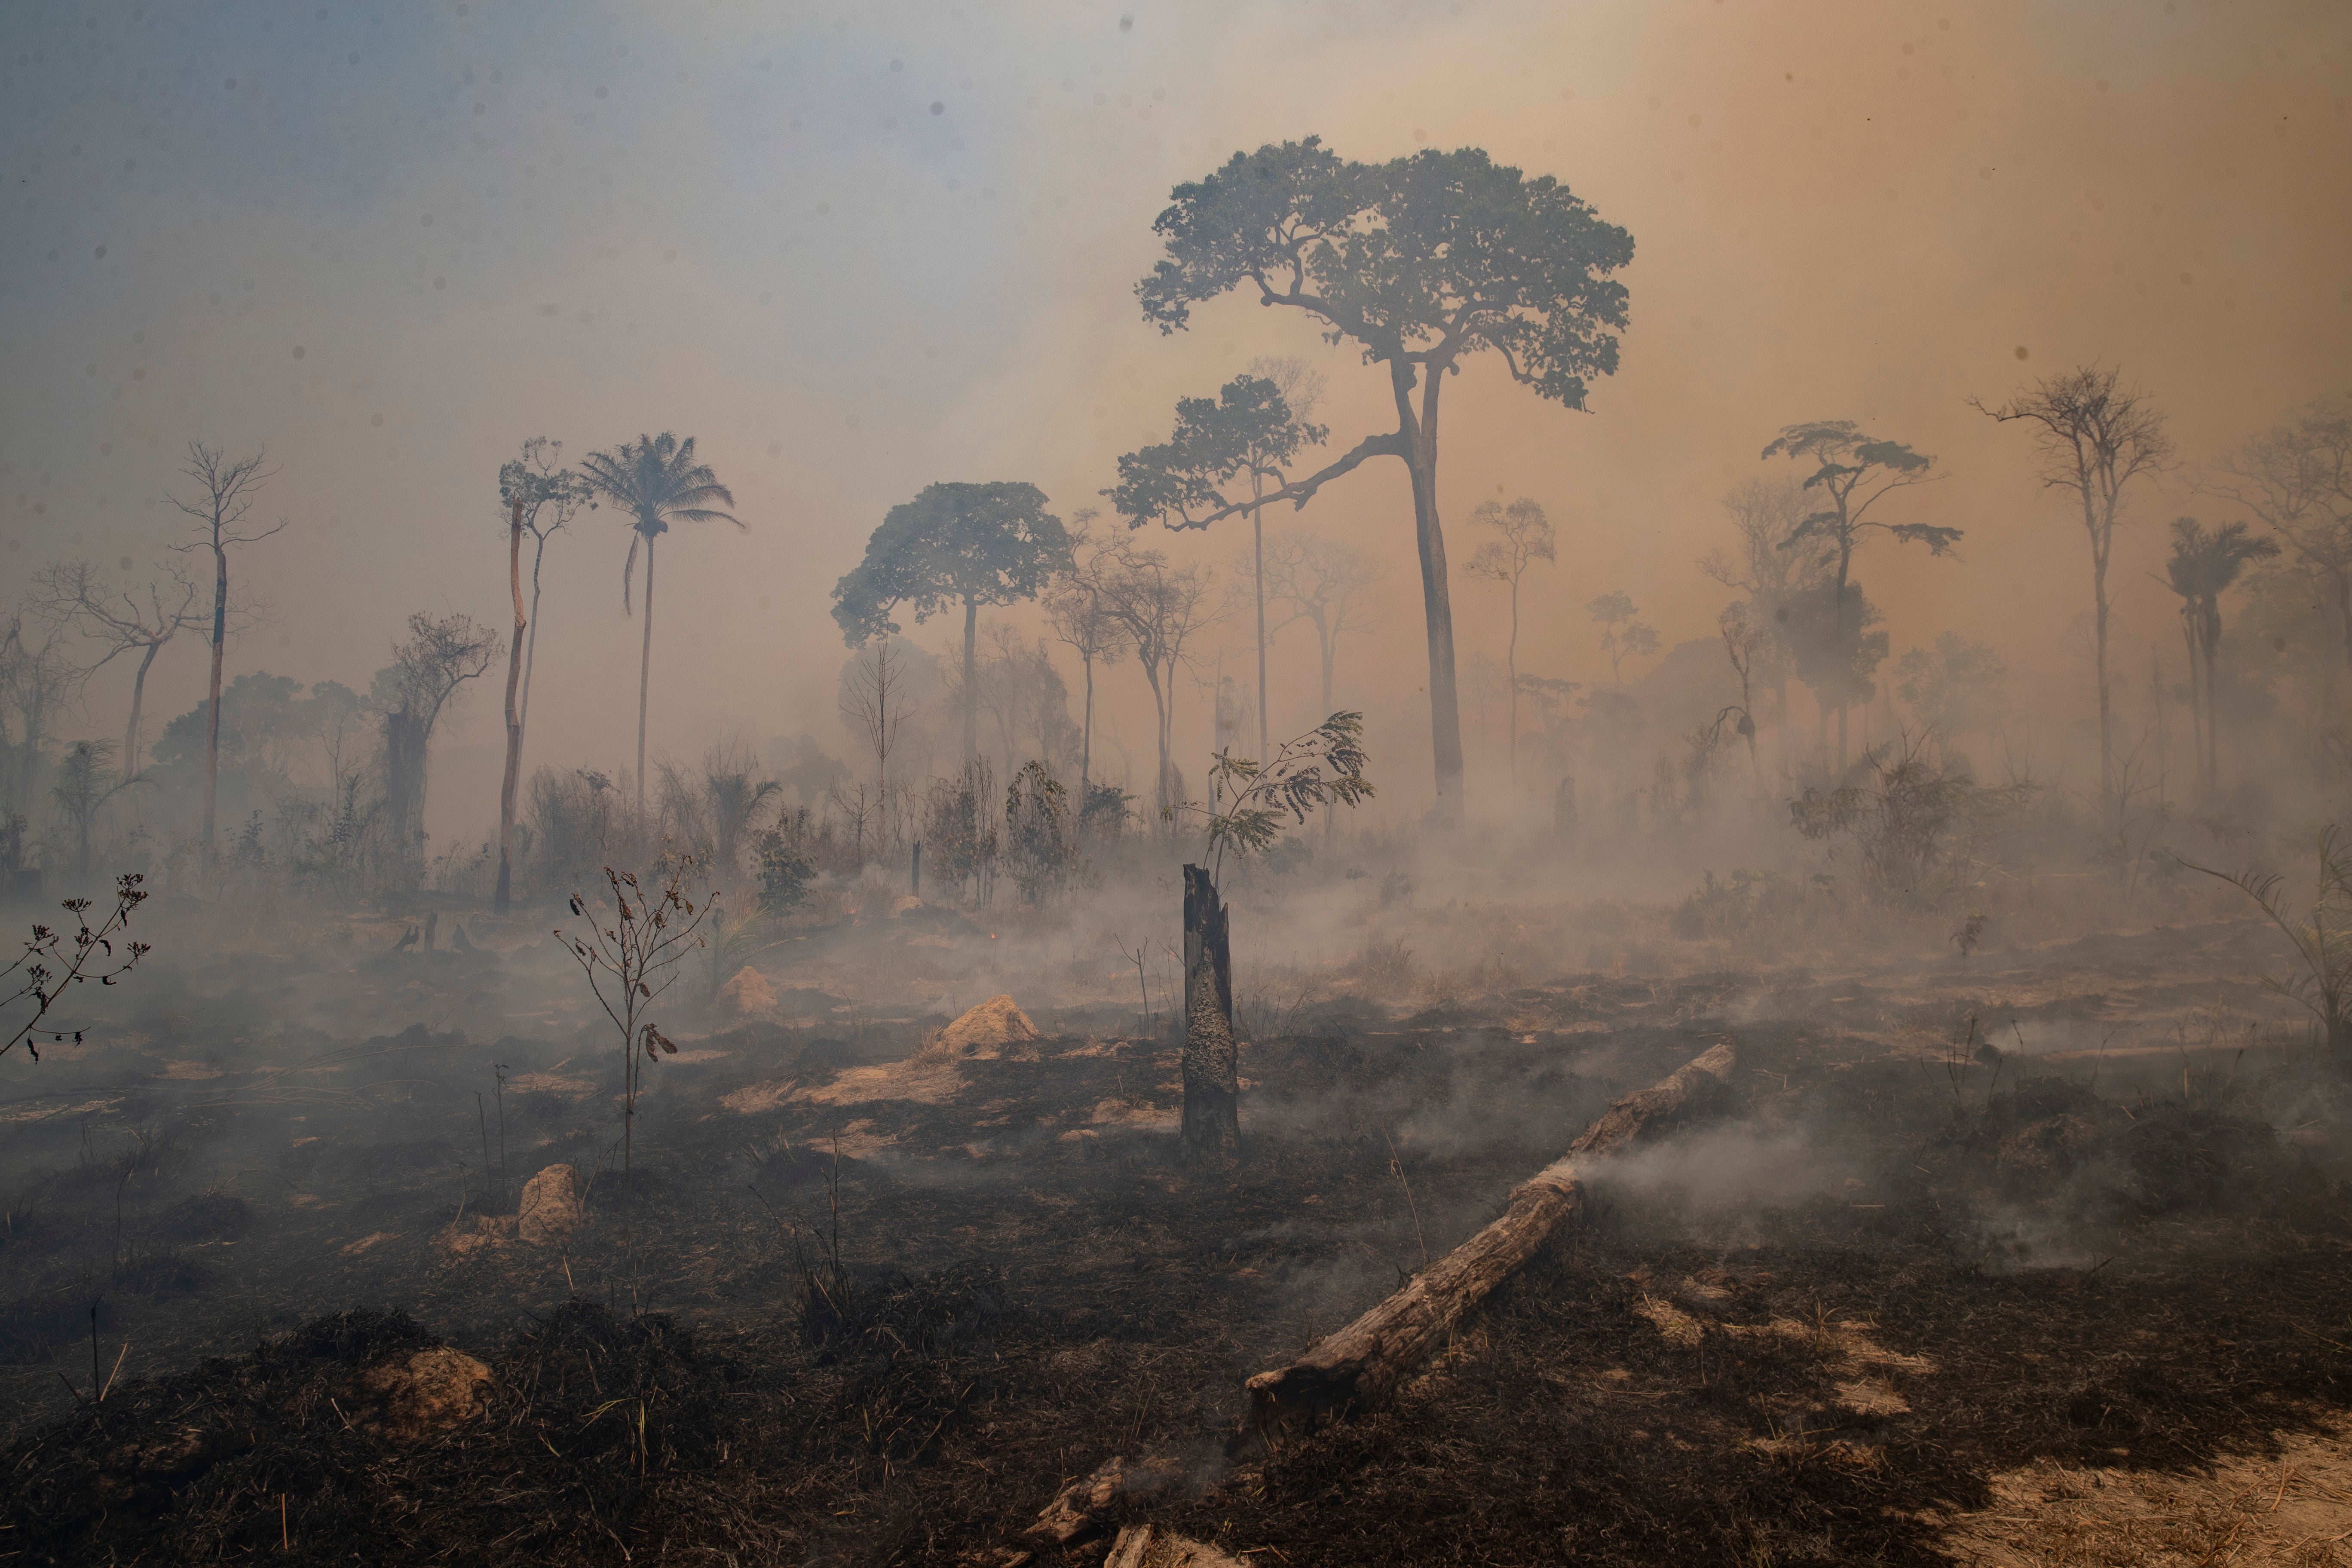 Fire consumes land recently deforested by cattle farmers in Brazil